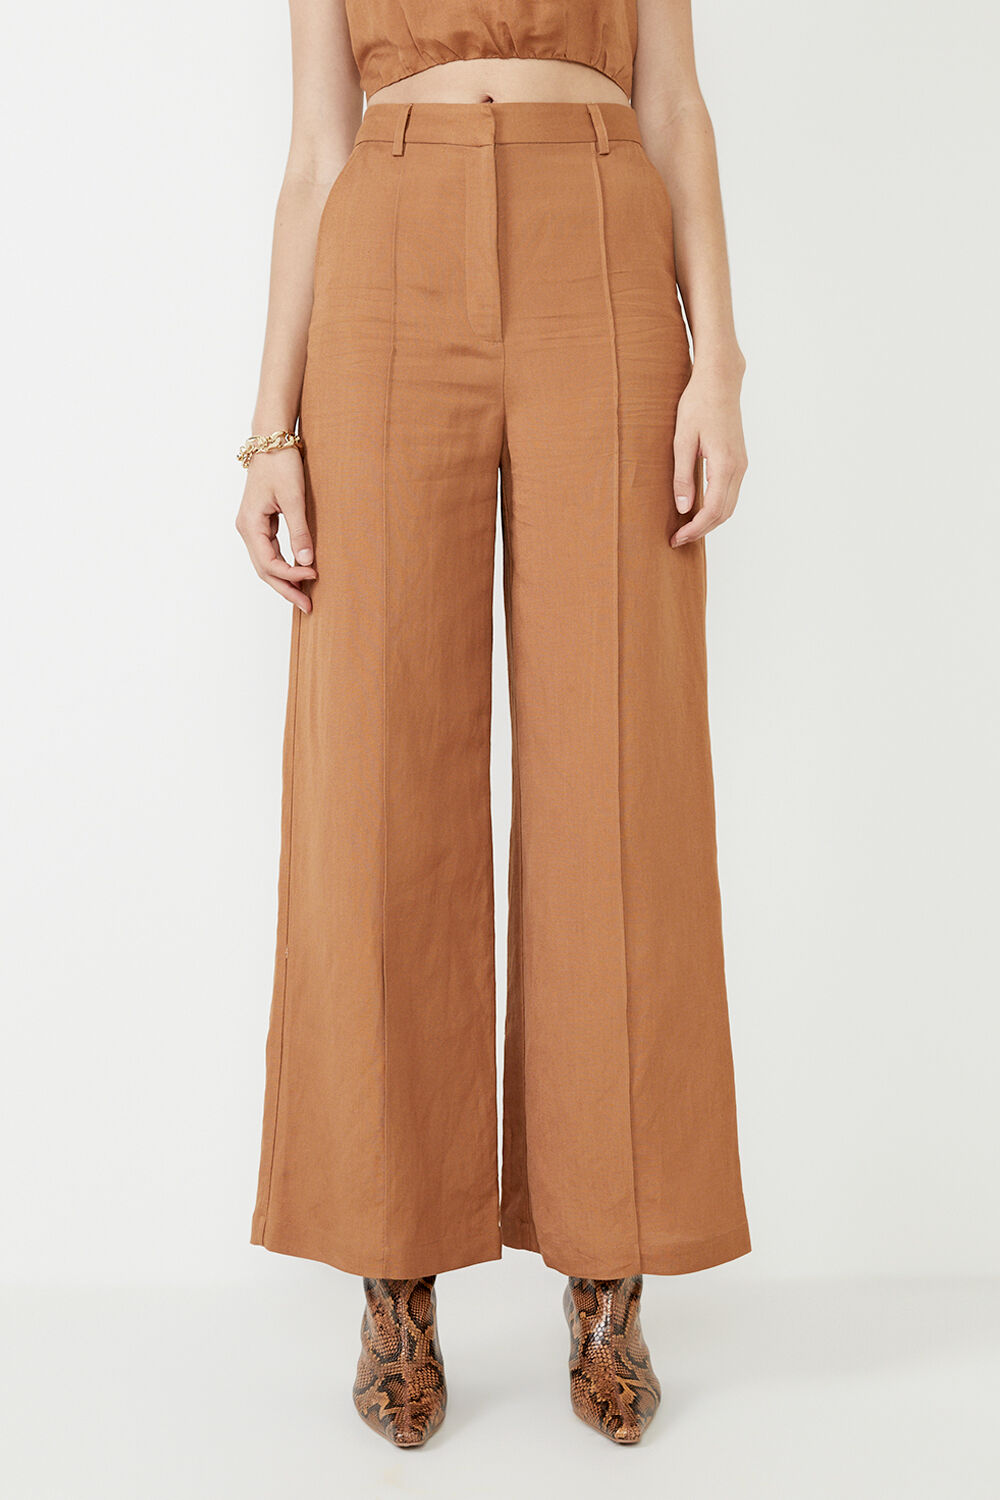 Pin on Trousers - Pants